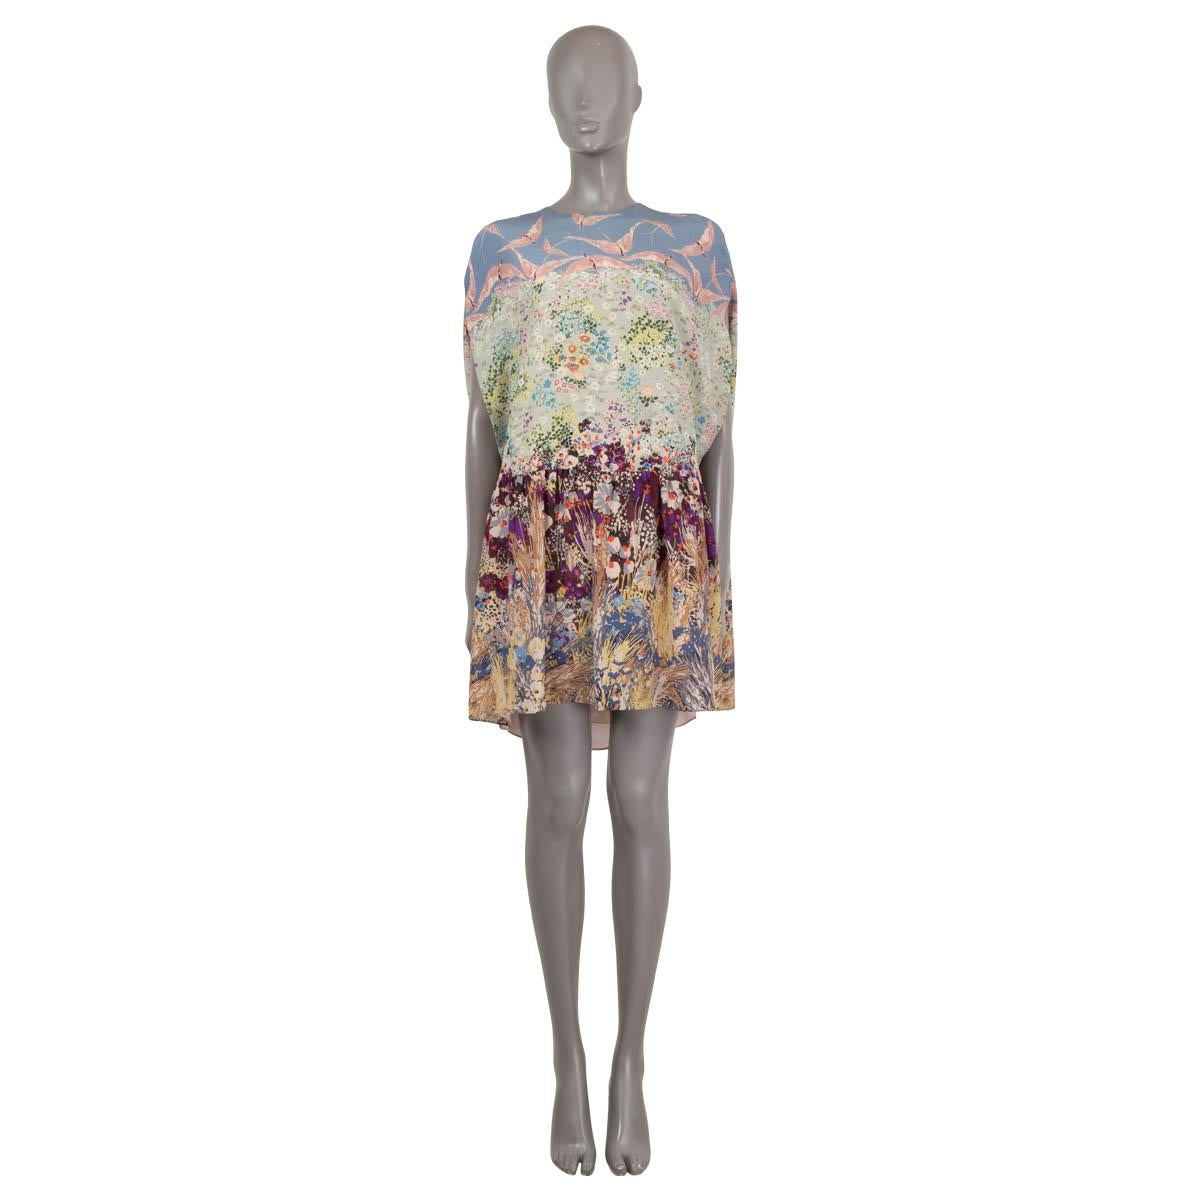 100% authentic Valentino mini dress with multicolor landscape and flamingo print in crepe de chine silk (100%). Features cape-inspired sleeves, round neck, dropped waist with a gathered skirt. Closes with a concealed zipper in the back. Lined in